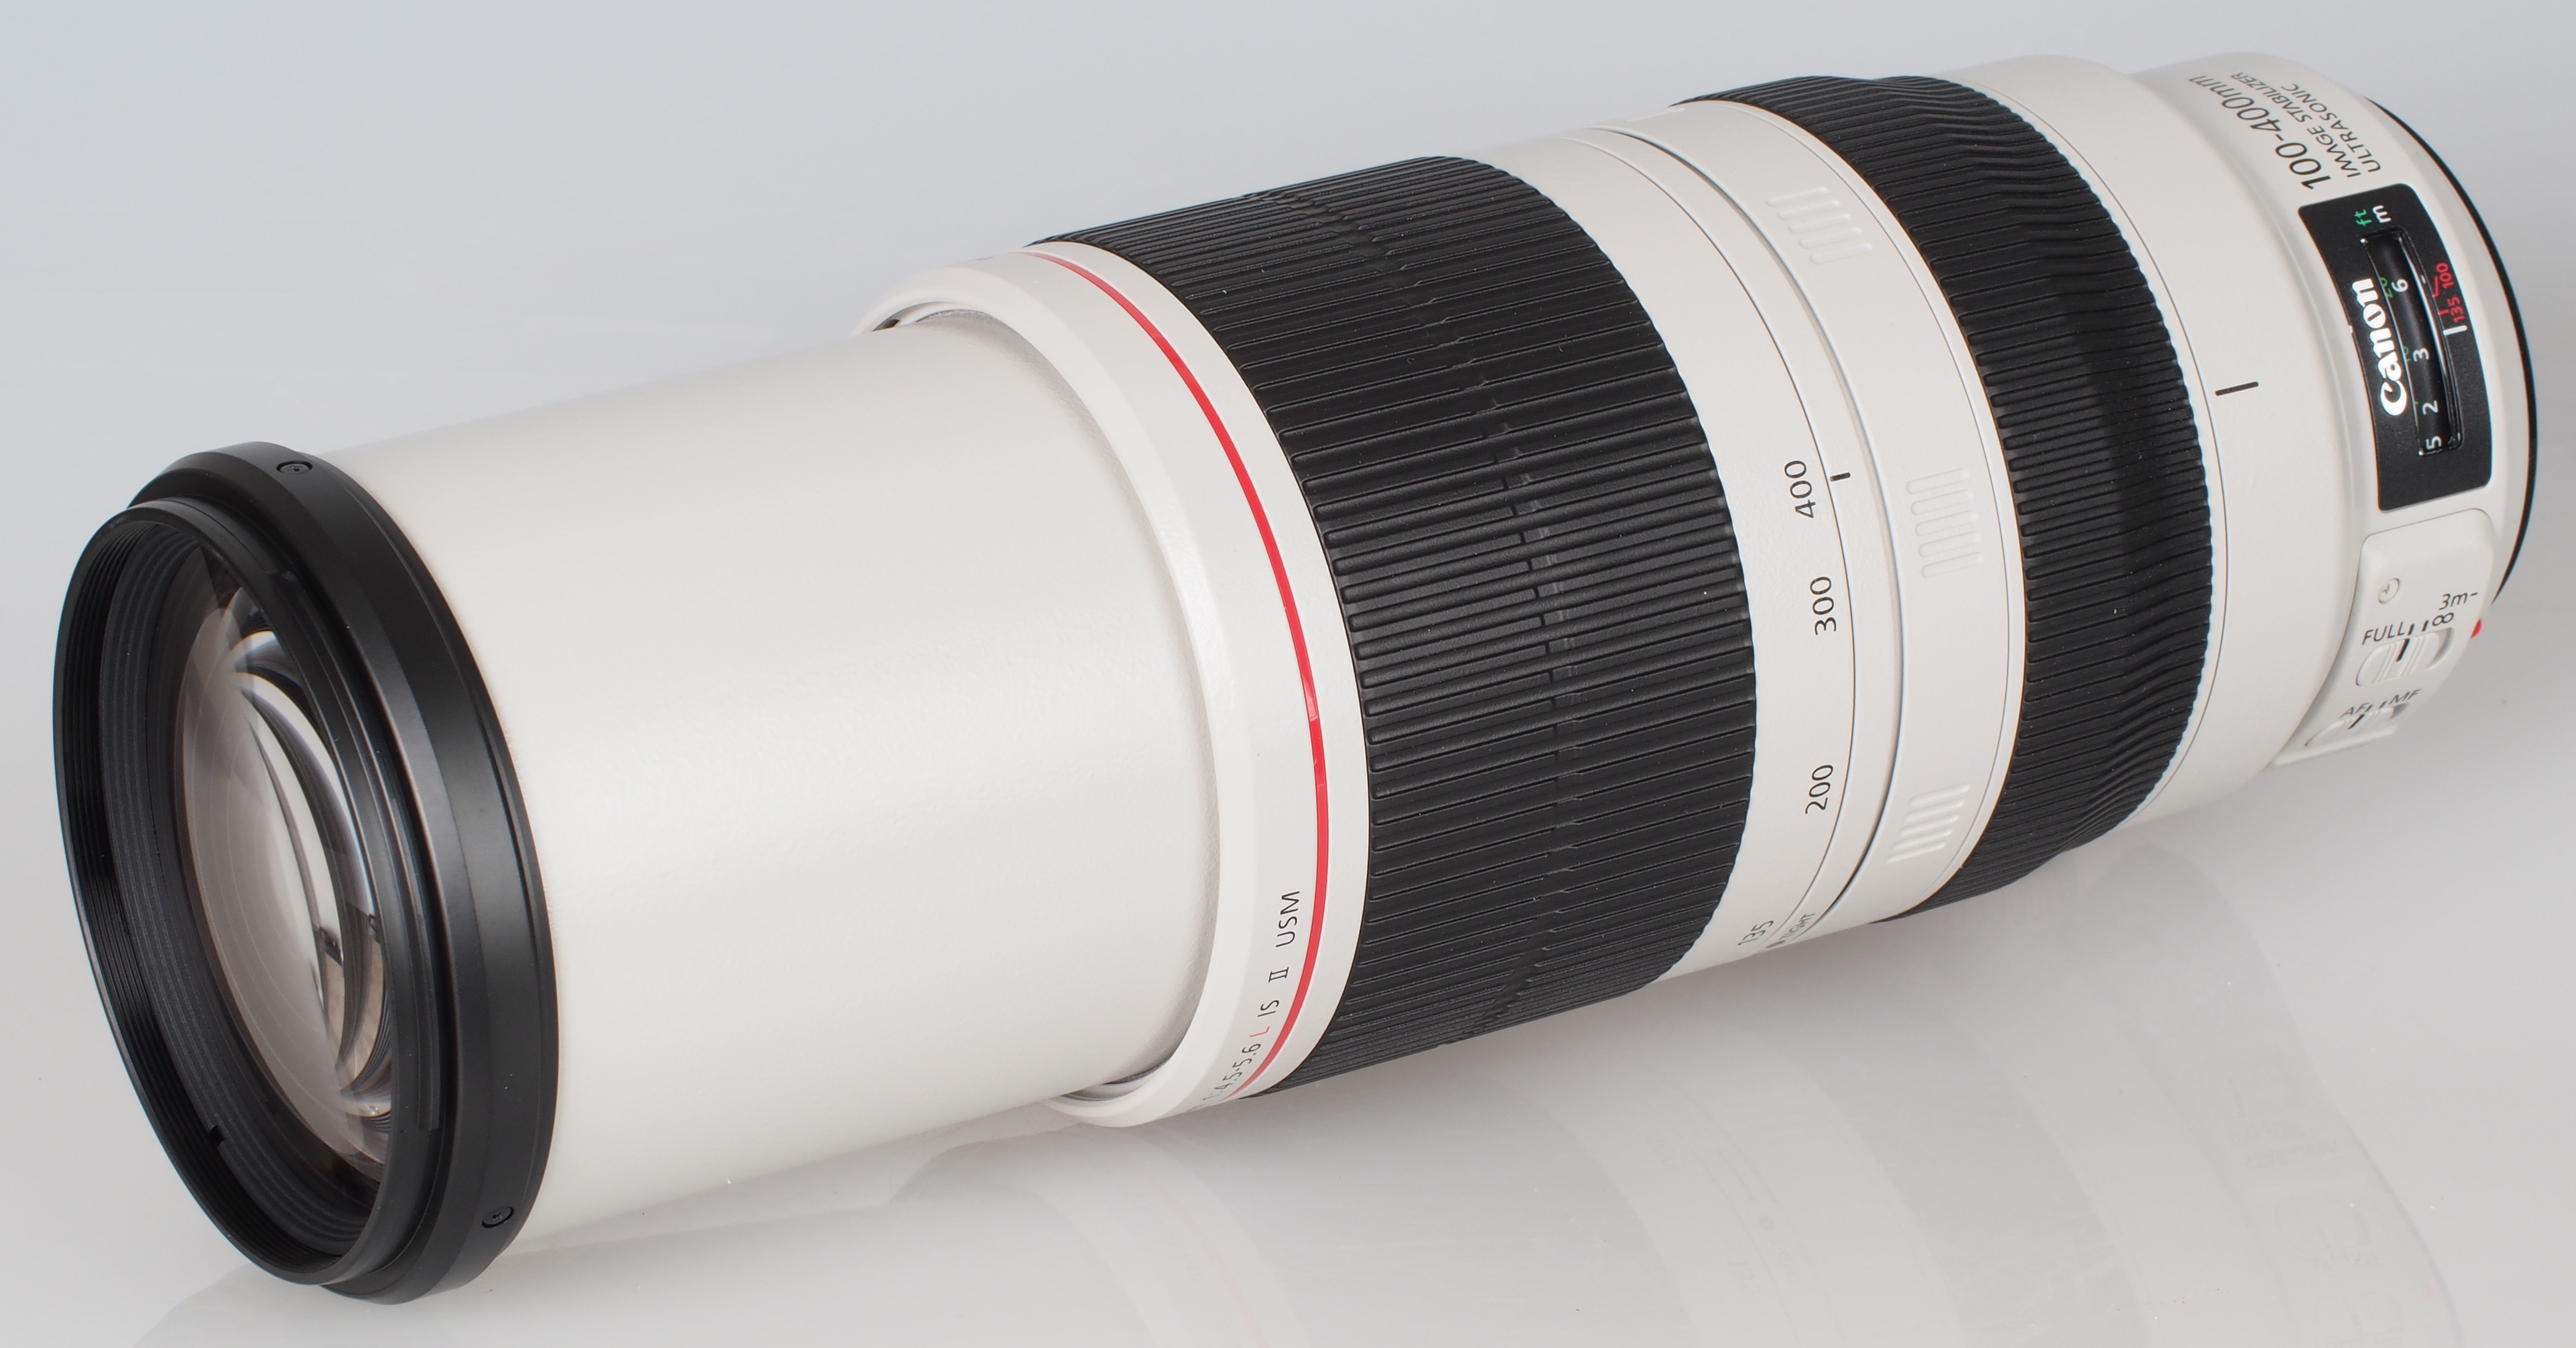 Canon zoom lens 100-400mm 4.5-5.6L IS